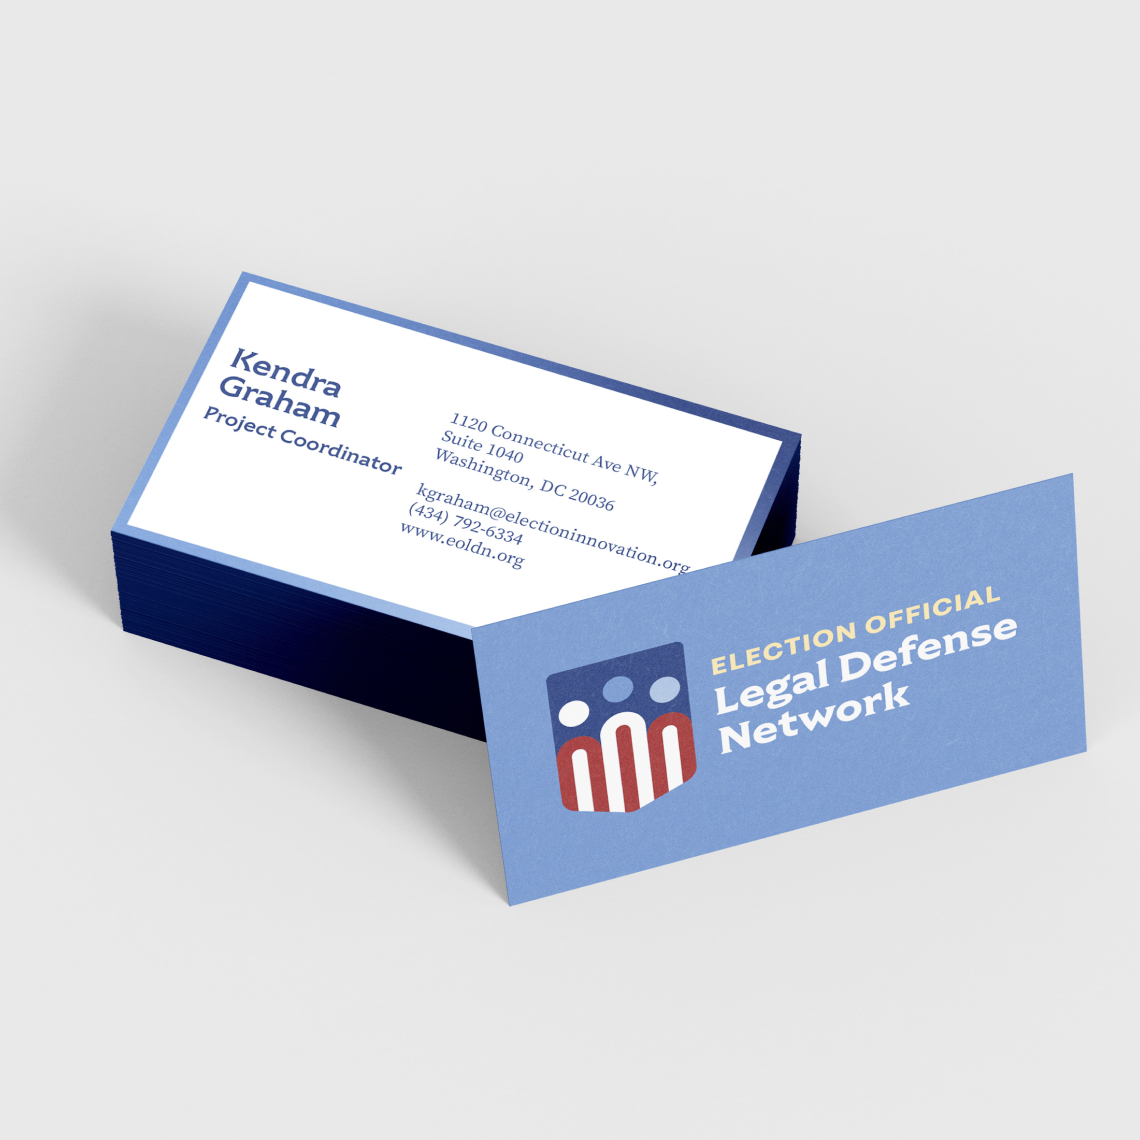 EOLDN Business Cards designed by Kilter